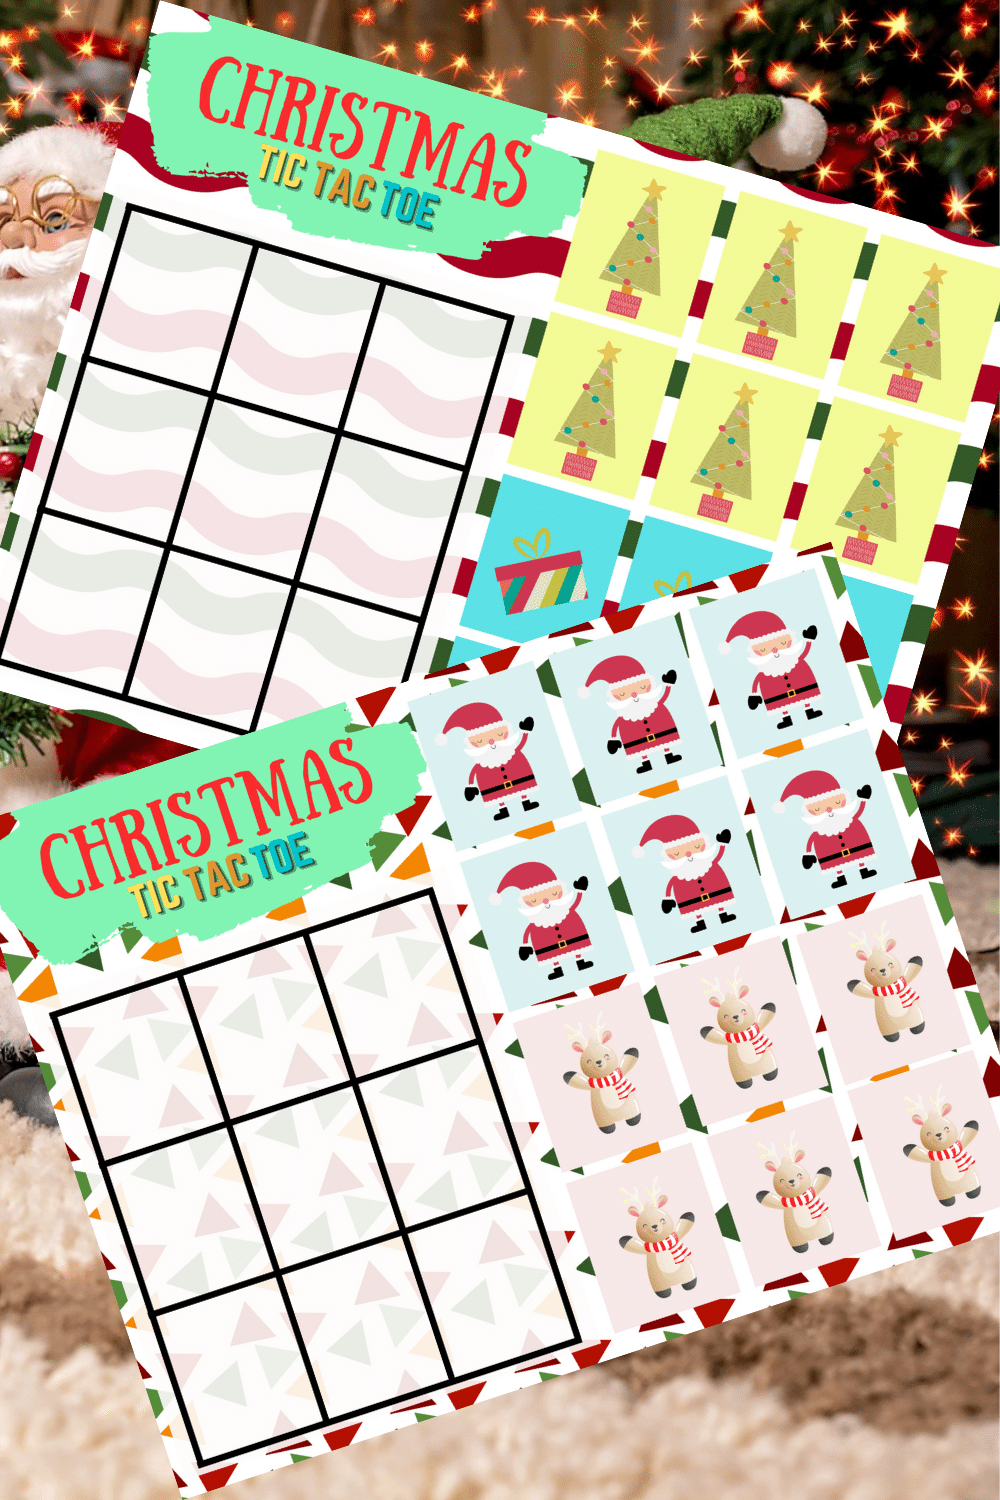 2 printable Christmas Tic Tac Toe games  with Christmas decor in the background